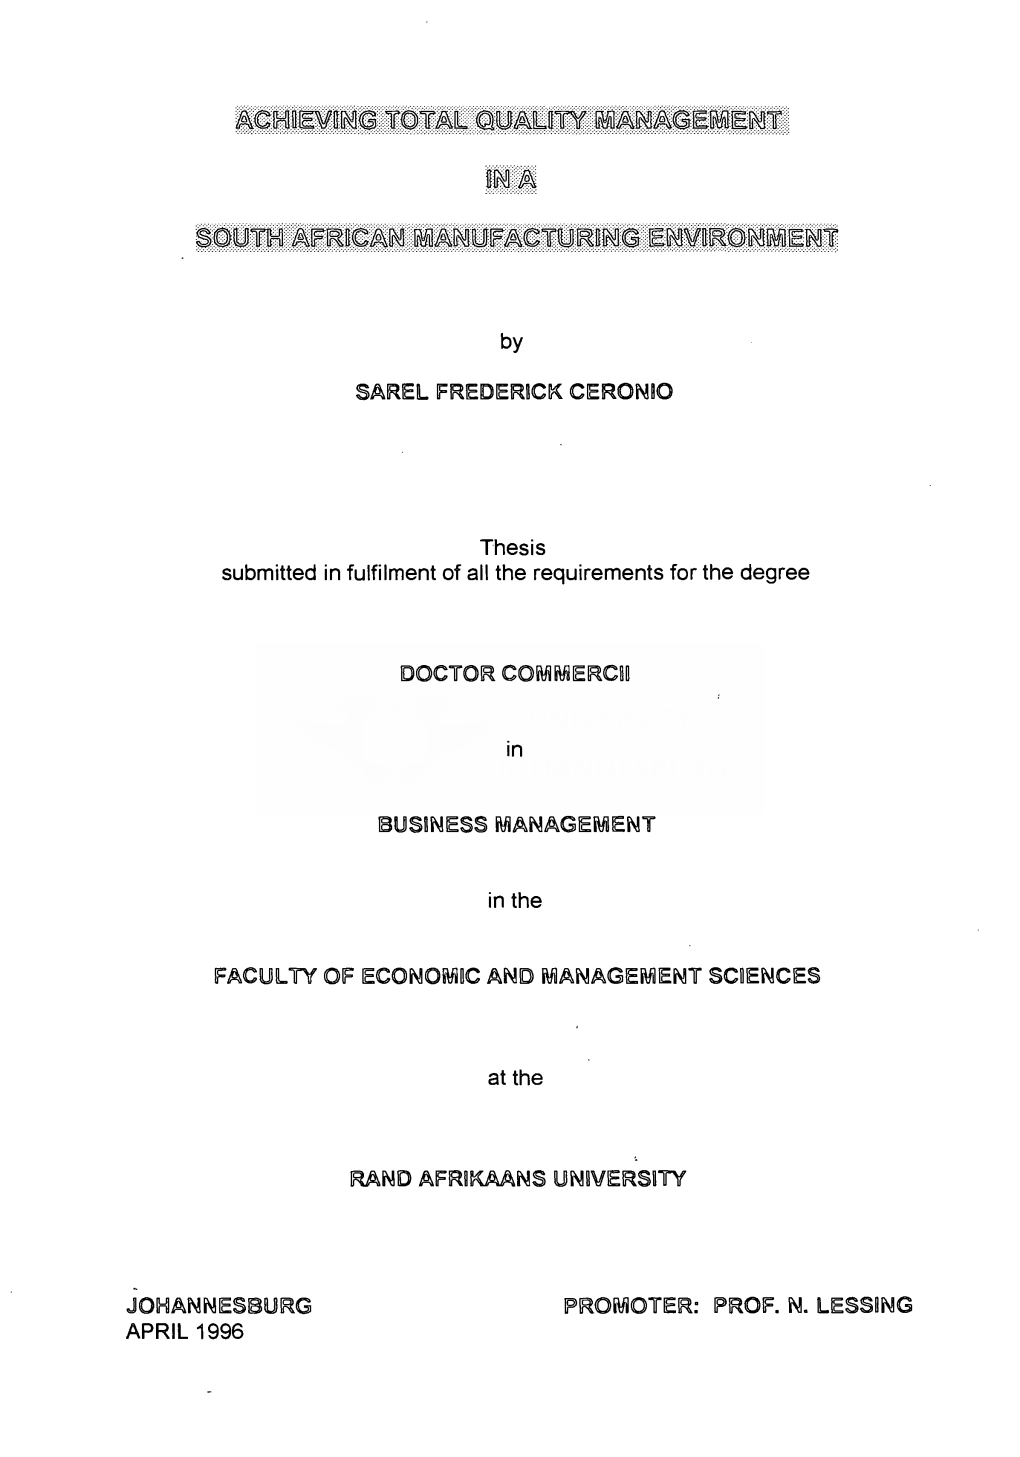 Achieving Total Quality Management in a South African Manufacturing Environment UNIVERSITY � Rand Afrikaans University PROMOTER � Prof